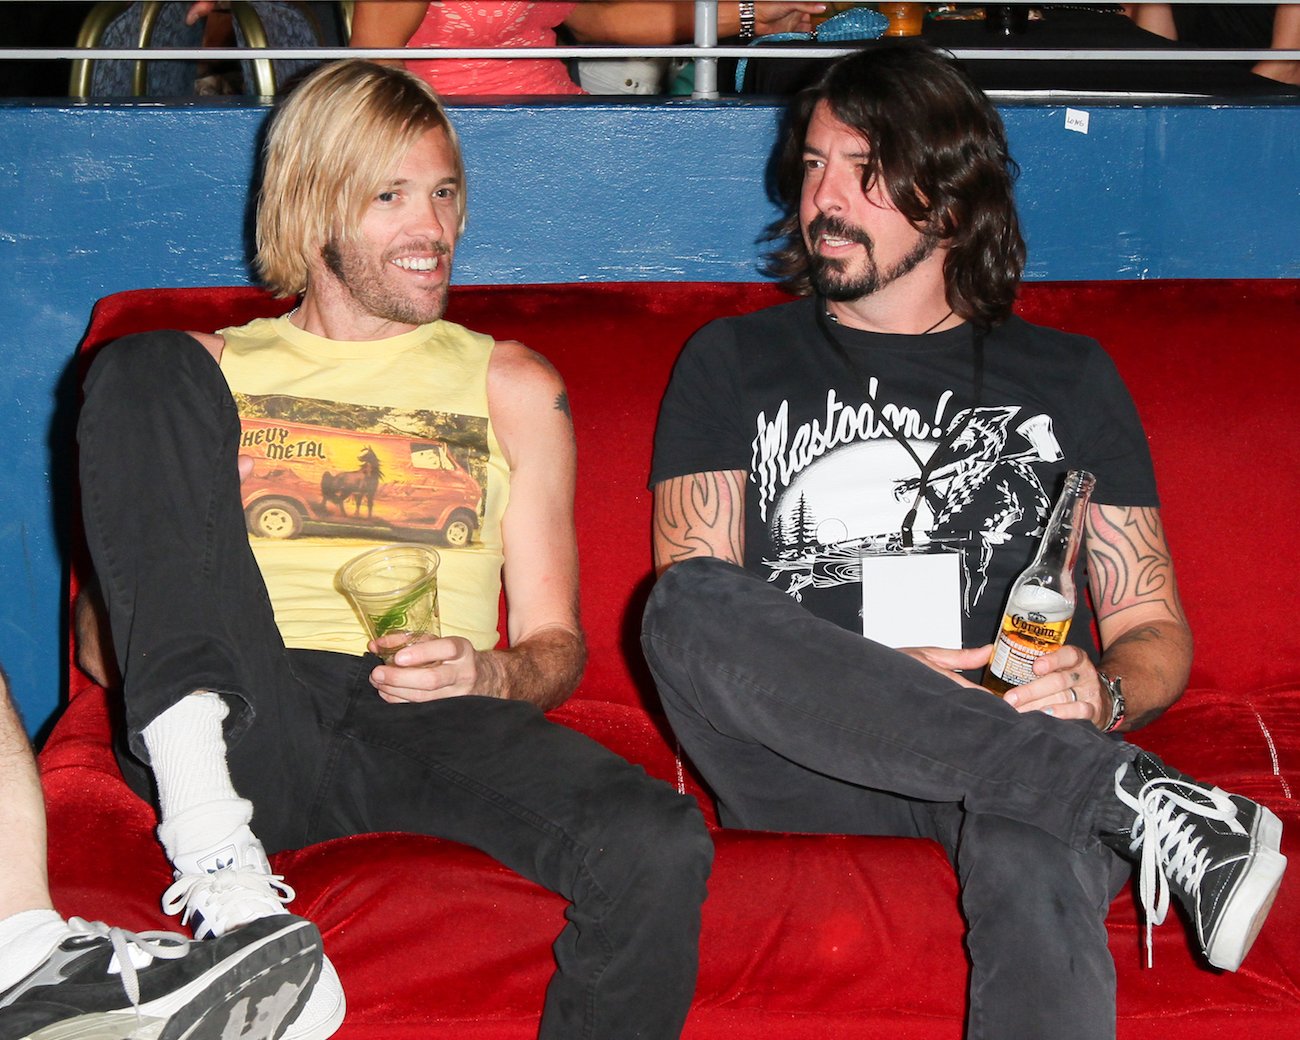 Taylor Hawkins and Dave Grohl at the Billabong XXL Big Wave Awards in 2012.